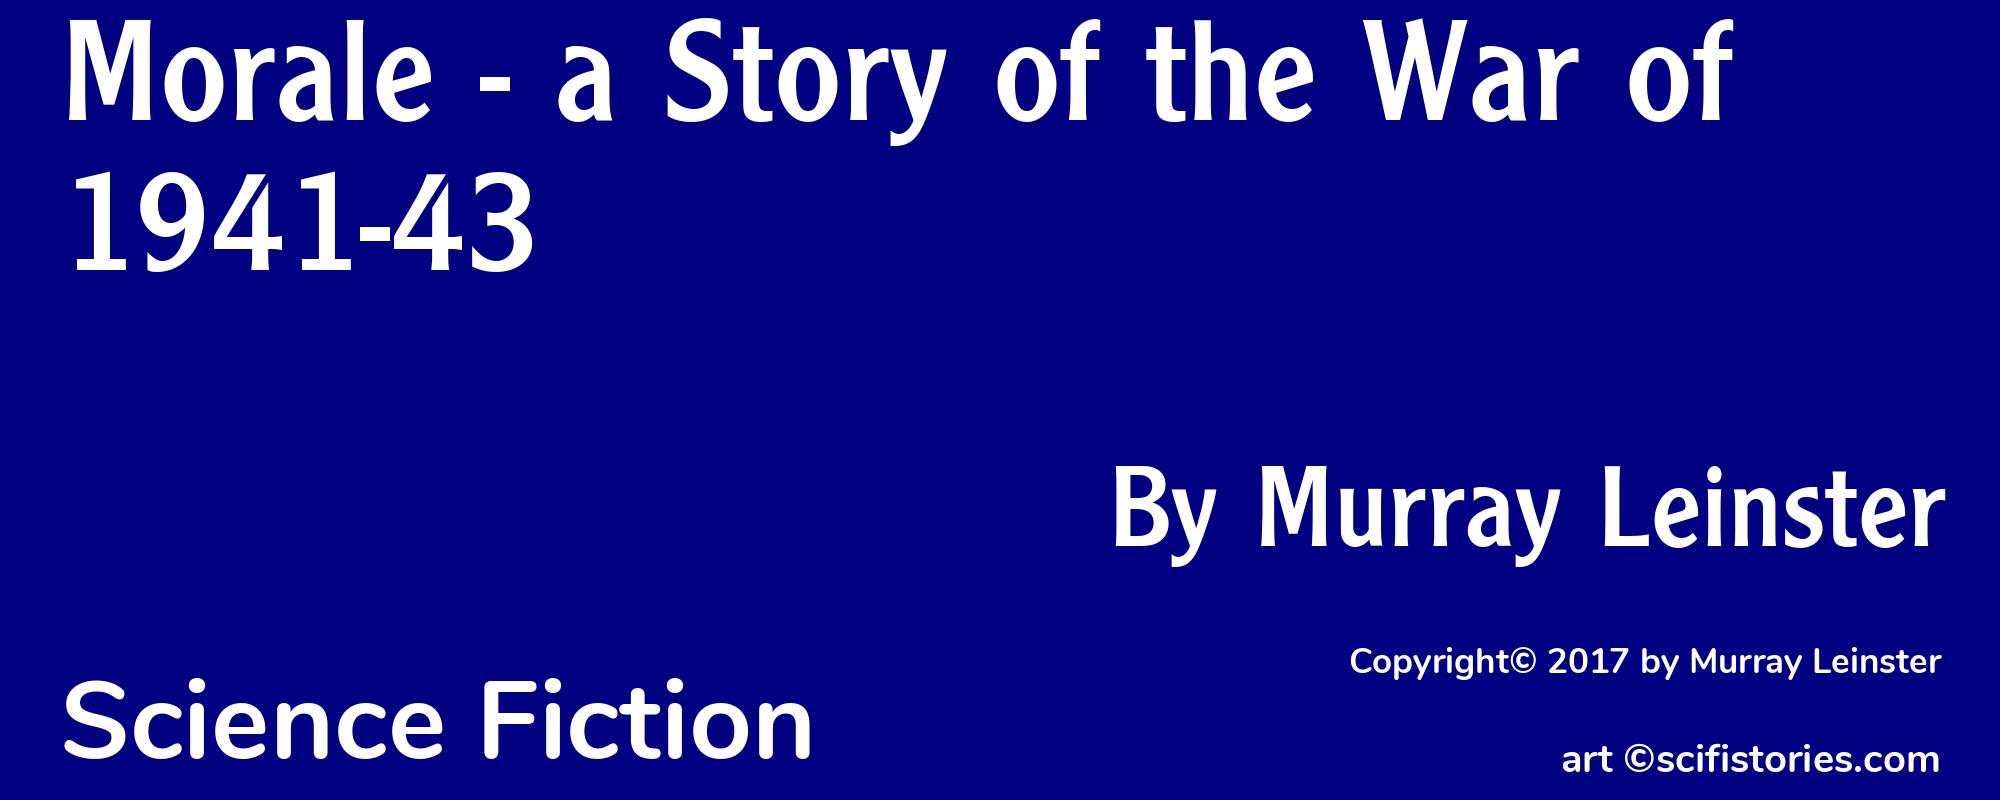 Morale - a Story of the War of 1941-43 - Cover